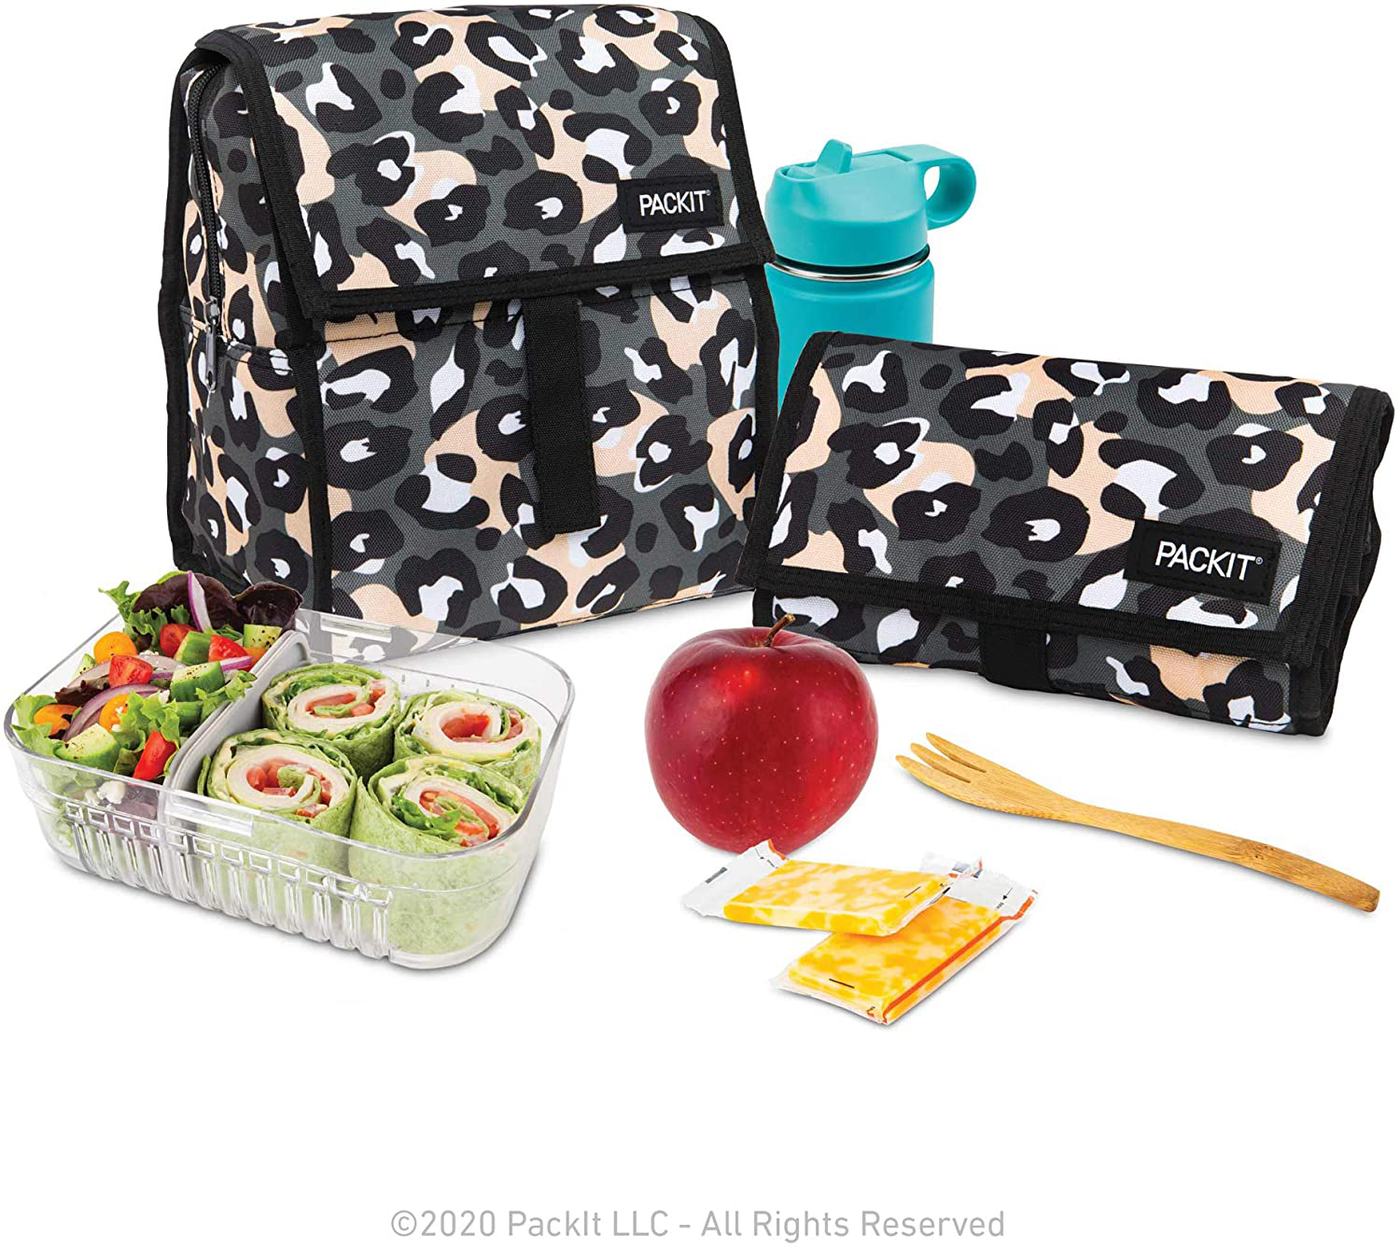 PackIt Freezable Lunch Bag with Zip Closure, Pixel Hearts